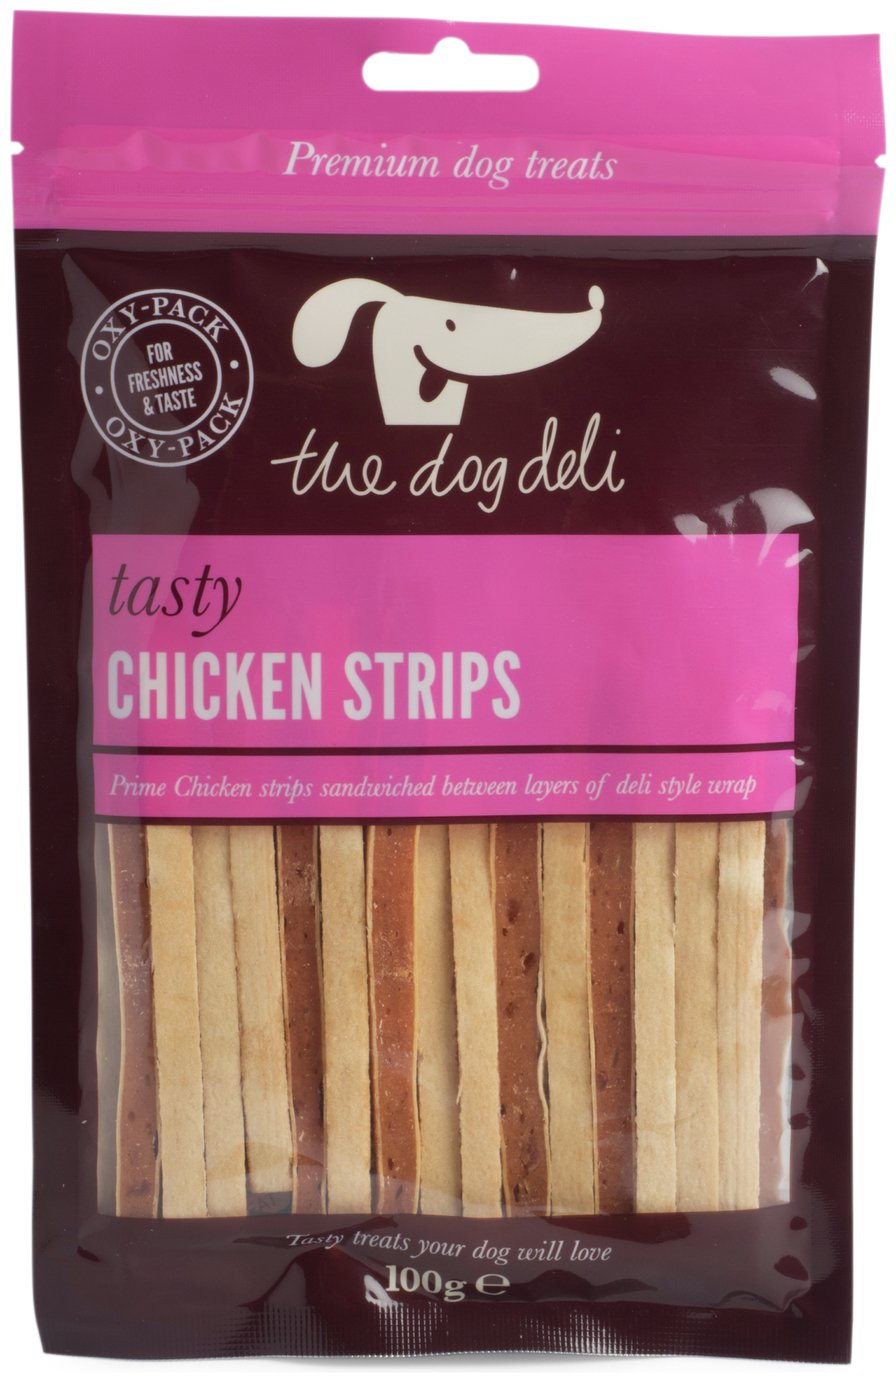 Petface 100g Pack of Chicken Strips - Pack of 5